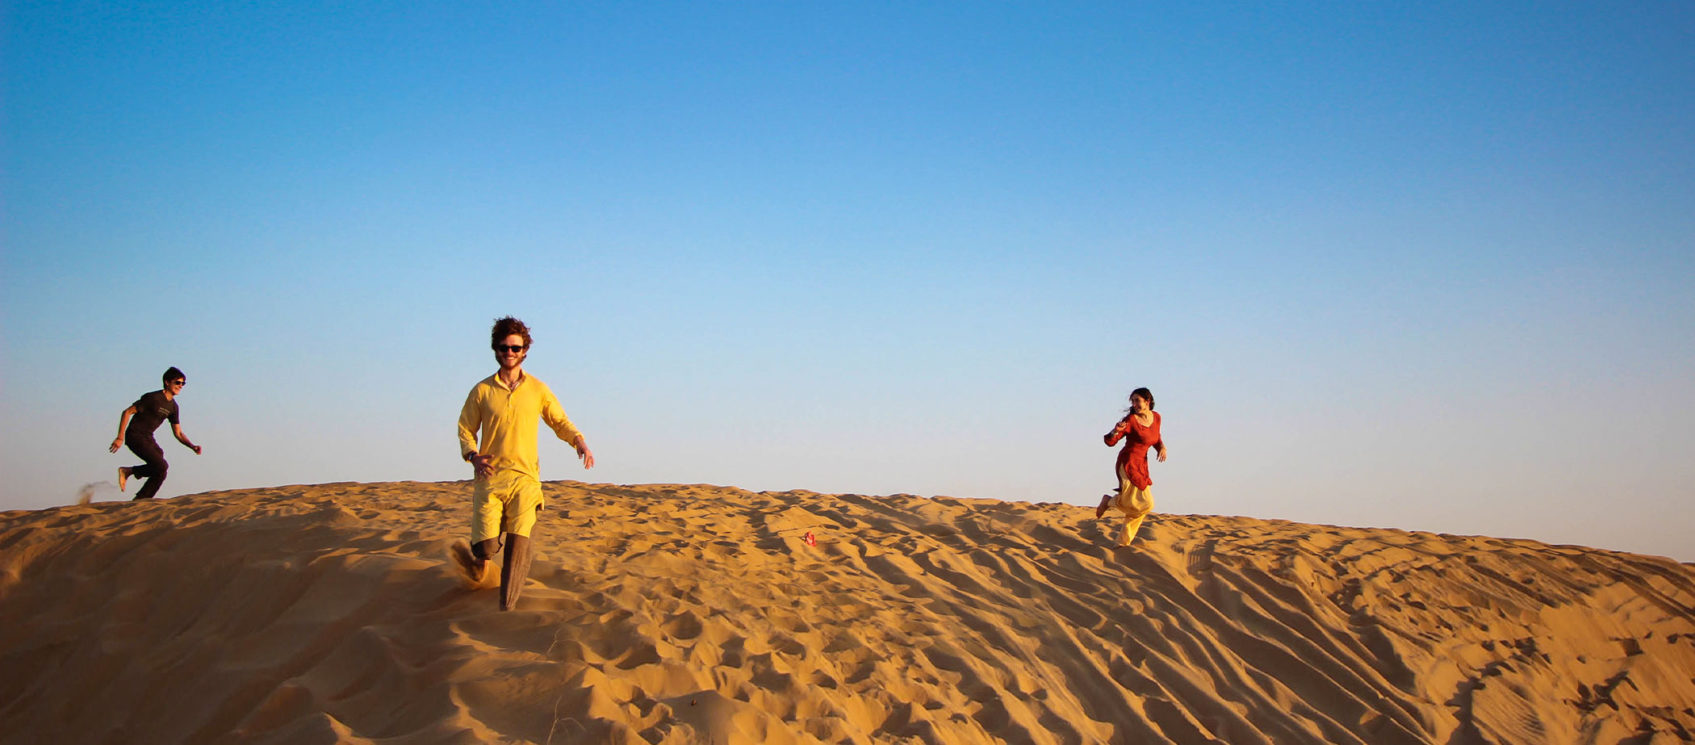 Man in yellow and woman in red running through sand dunes (day)